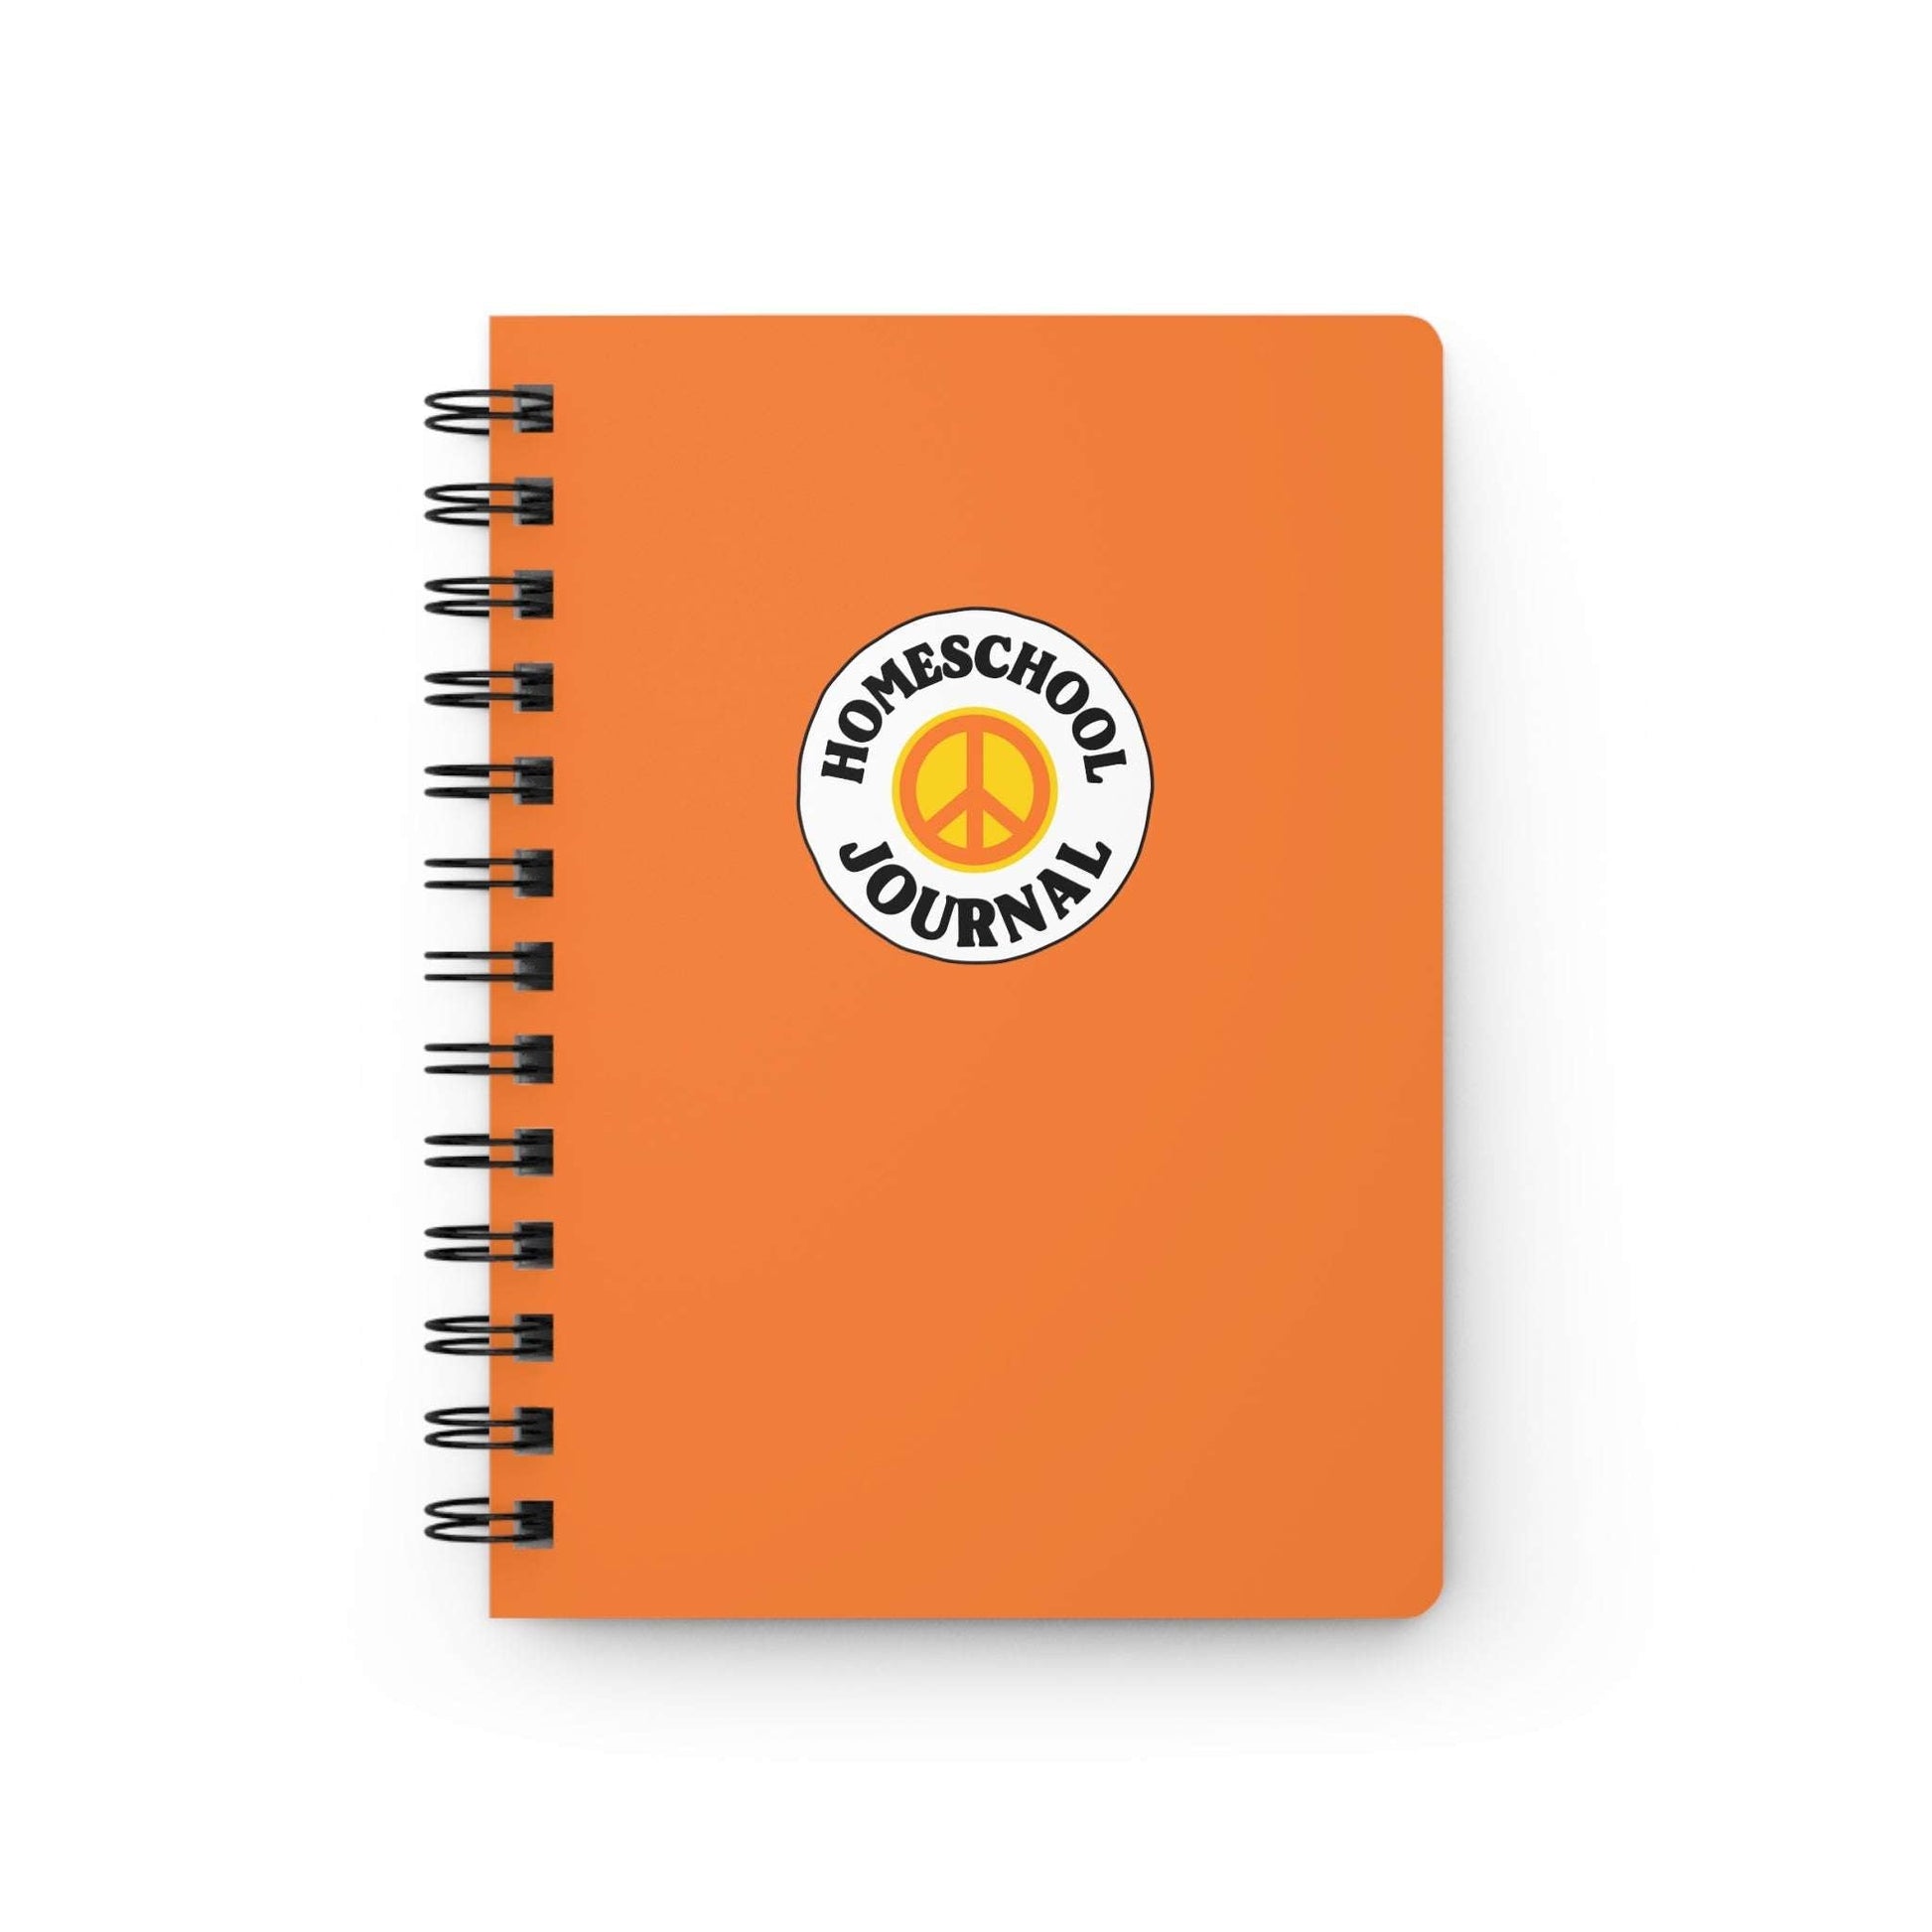 Peace Homeschool Spiral Bound JournalWolfe Paw DesignsPeace Homeschool Spiral Bound JournalOrange - Peace symbol Homeschool lined journal 
Your homeschooler can now write in style with our themed lined journals made for kids just like yours!
Each color hasPeace Homeschool Spiral Bound Journal